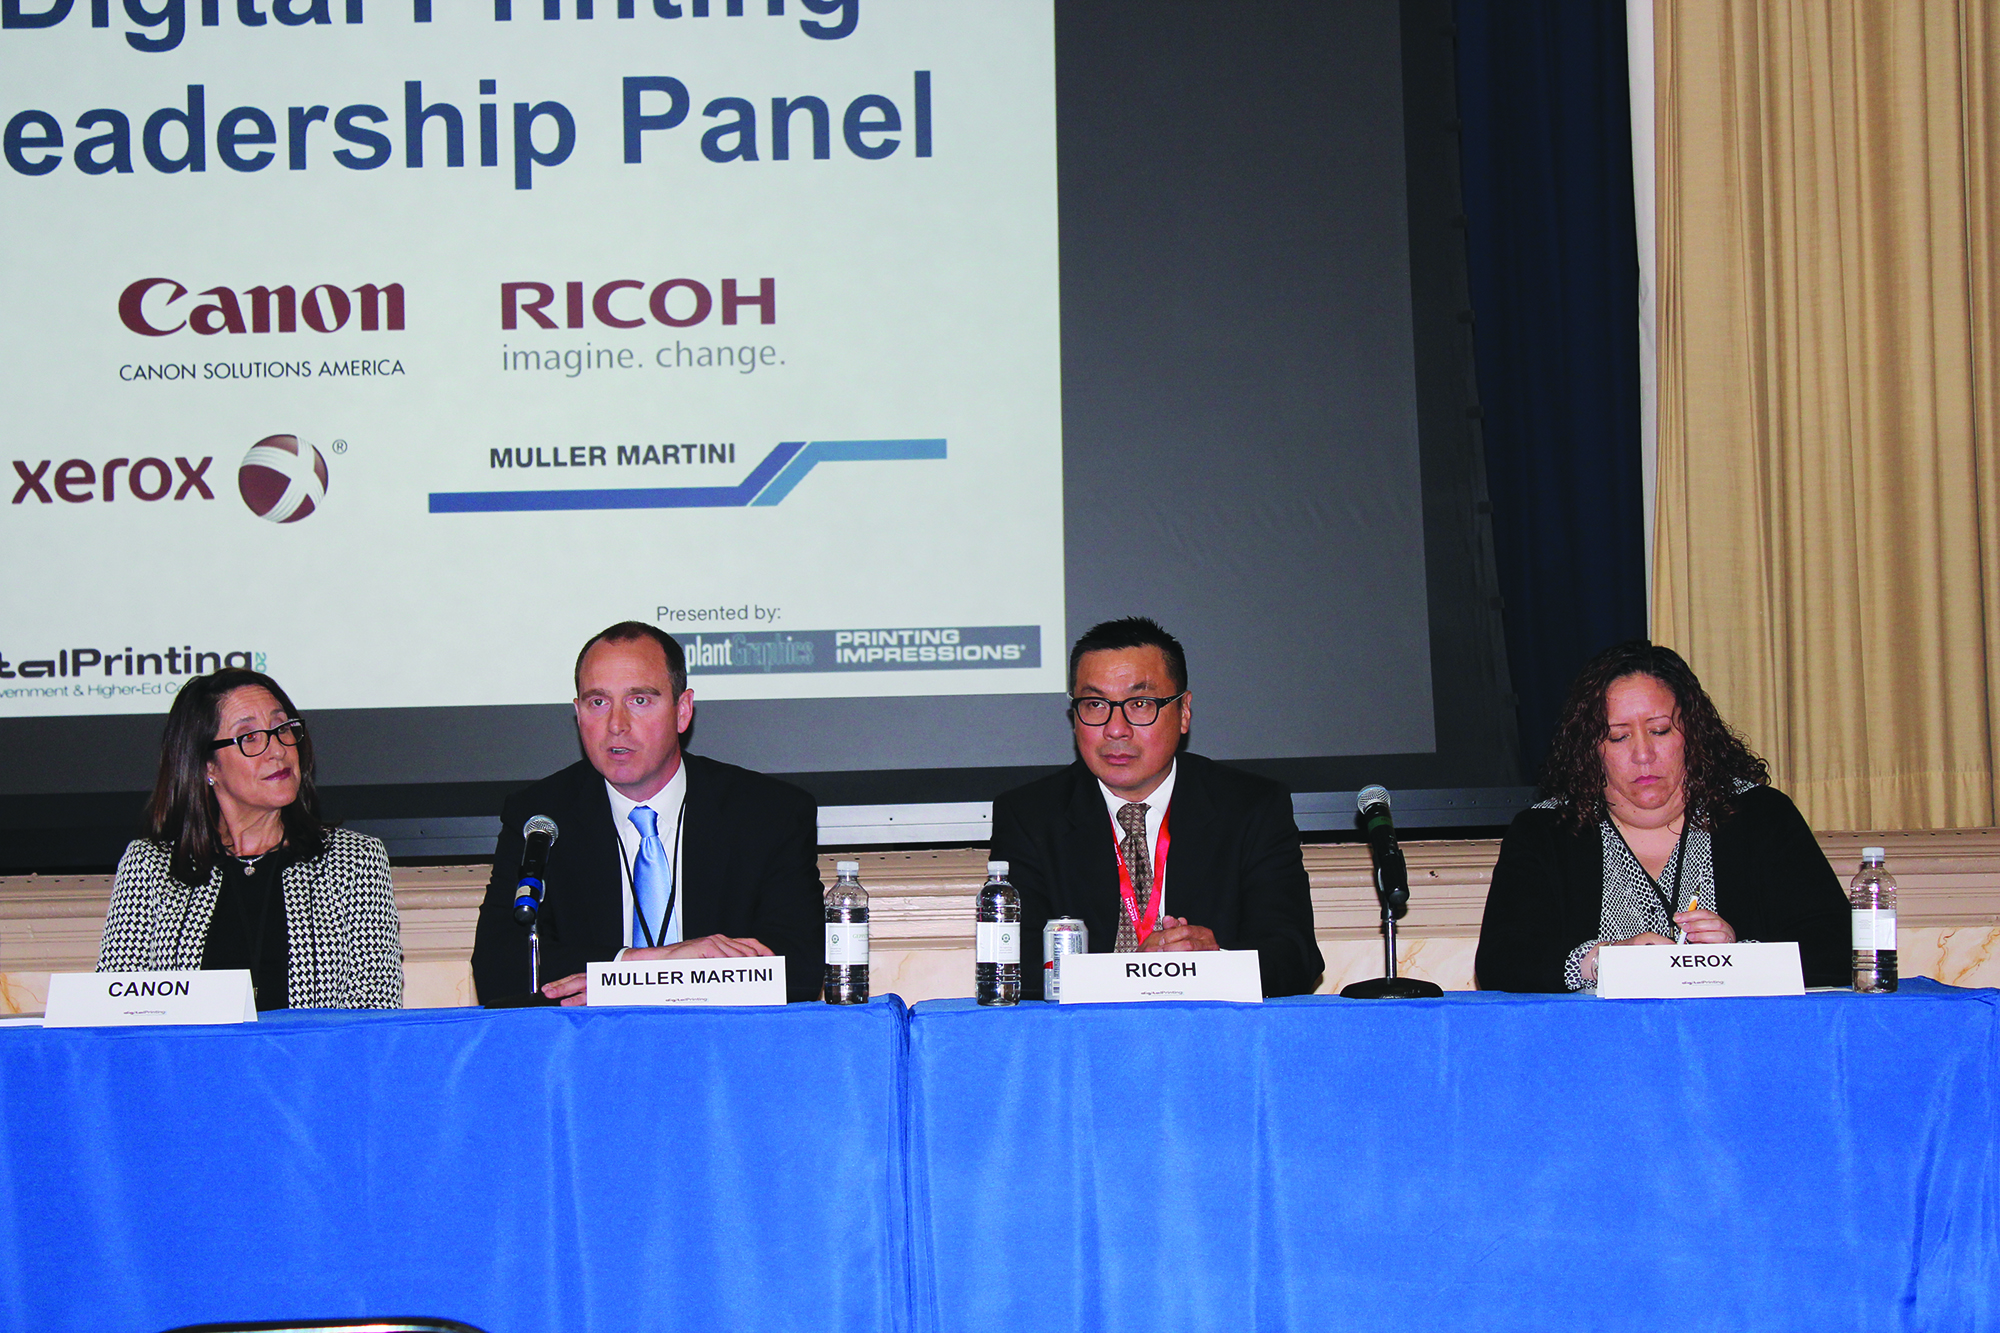 The Digital Printing Leadership Panel gave the top conference sponsors  a chance to explain how their solutions can help in-plants succeed.  From the left: Sheri Jammallo (Canon Solutions America); Mike Wing (Muller Martini); Ed Wong (Ricoh USA); and Lucy Perez (Xerox). 